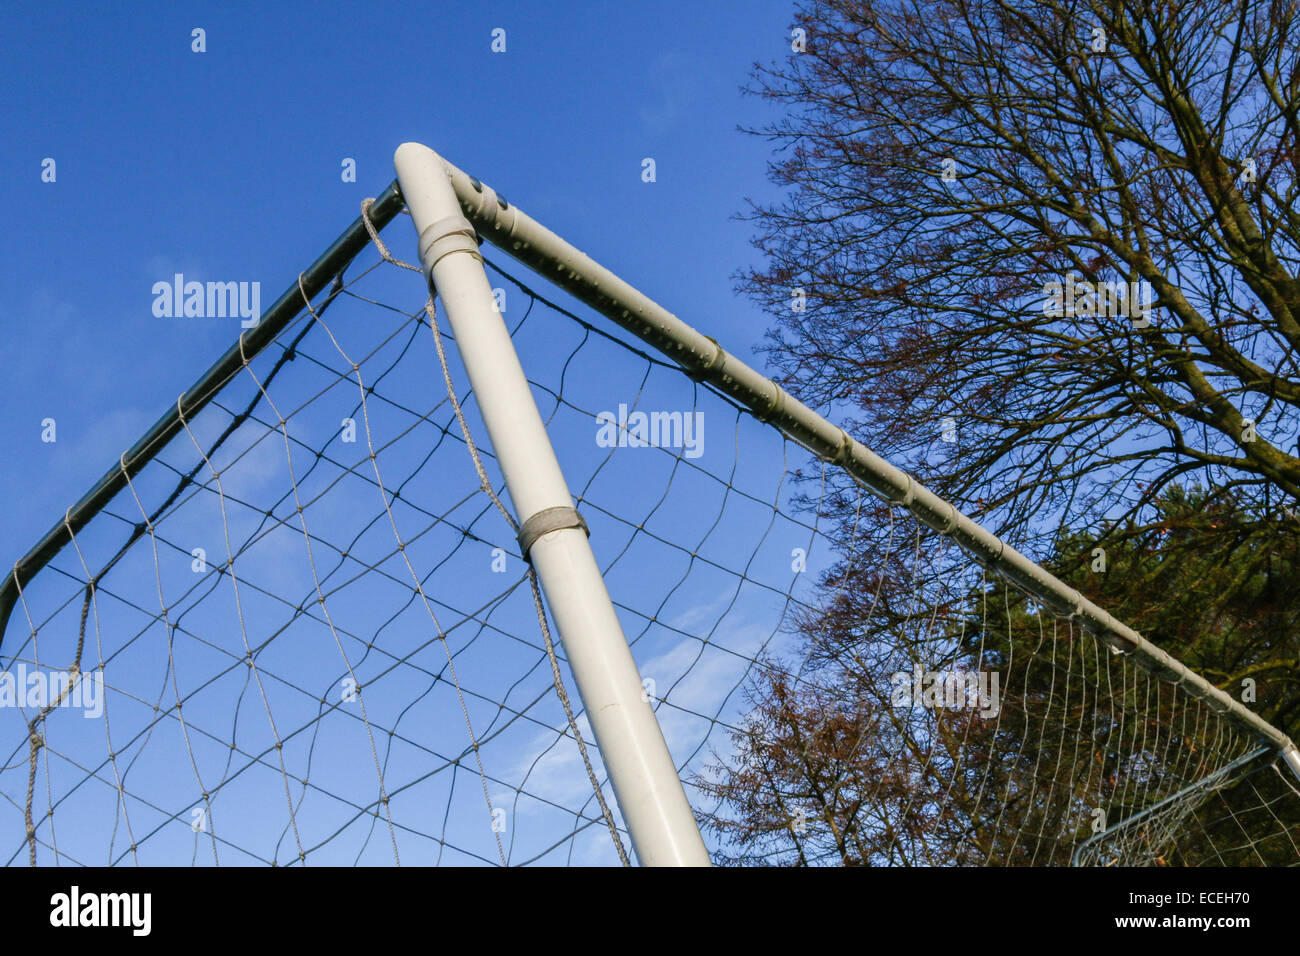 Corner of a soccer goalpost with net against a blue sky. Stock Photo